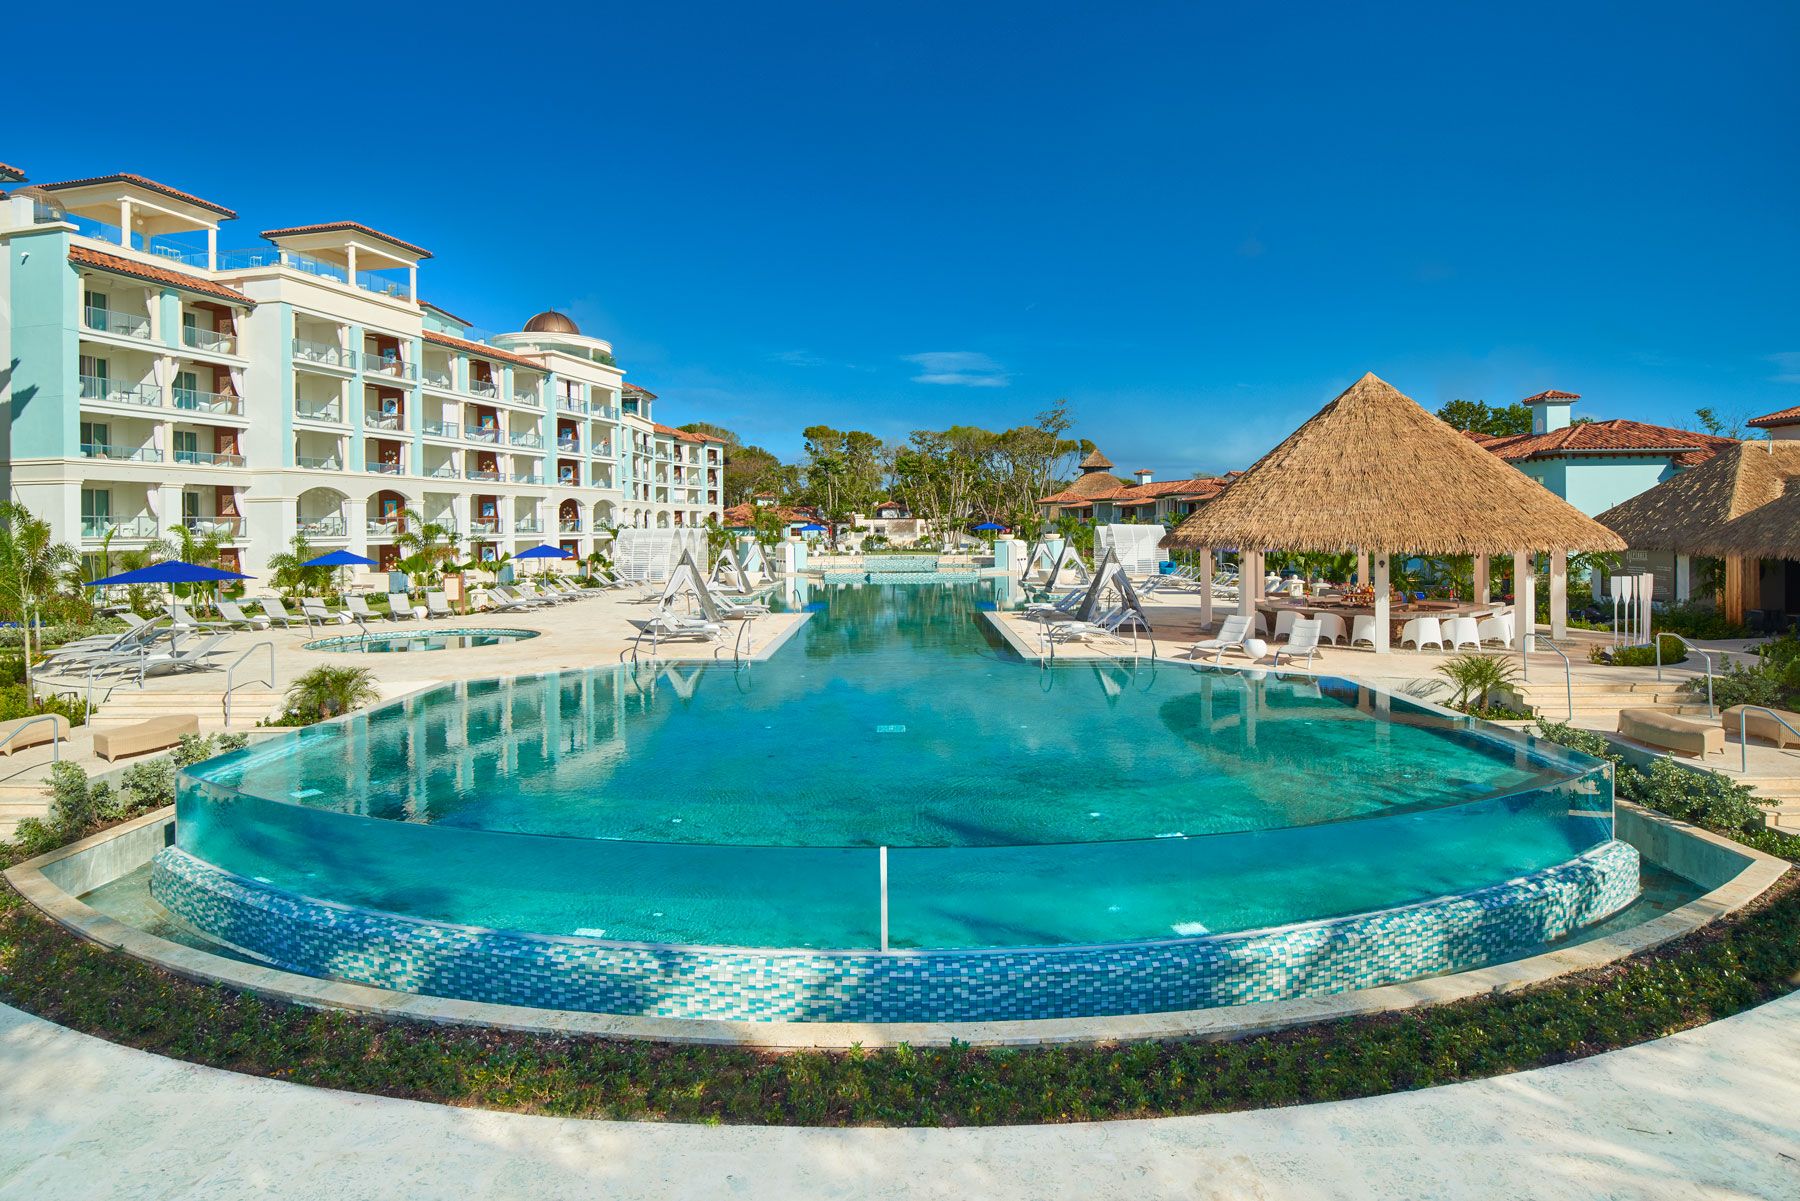 REVIEW What Guests Love About Sandals Royal Barbados